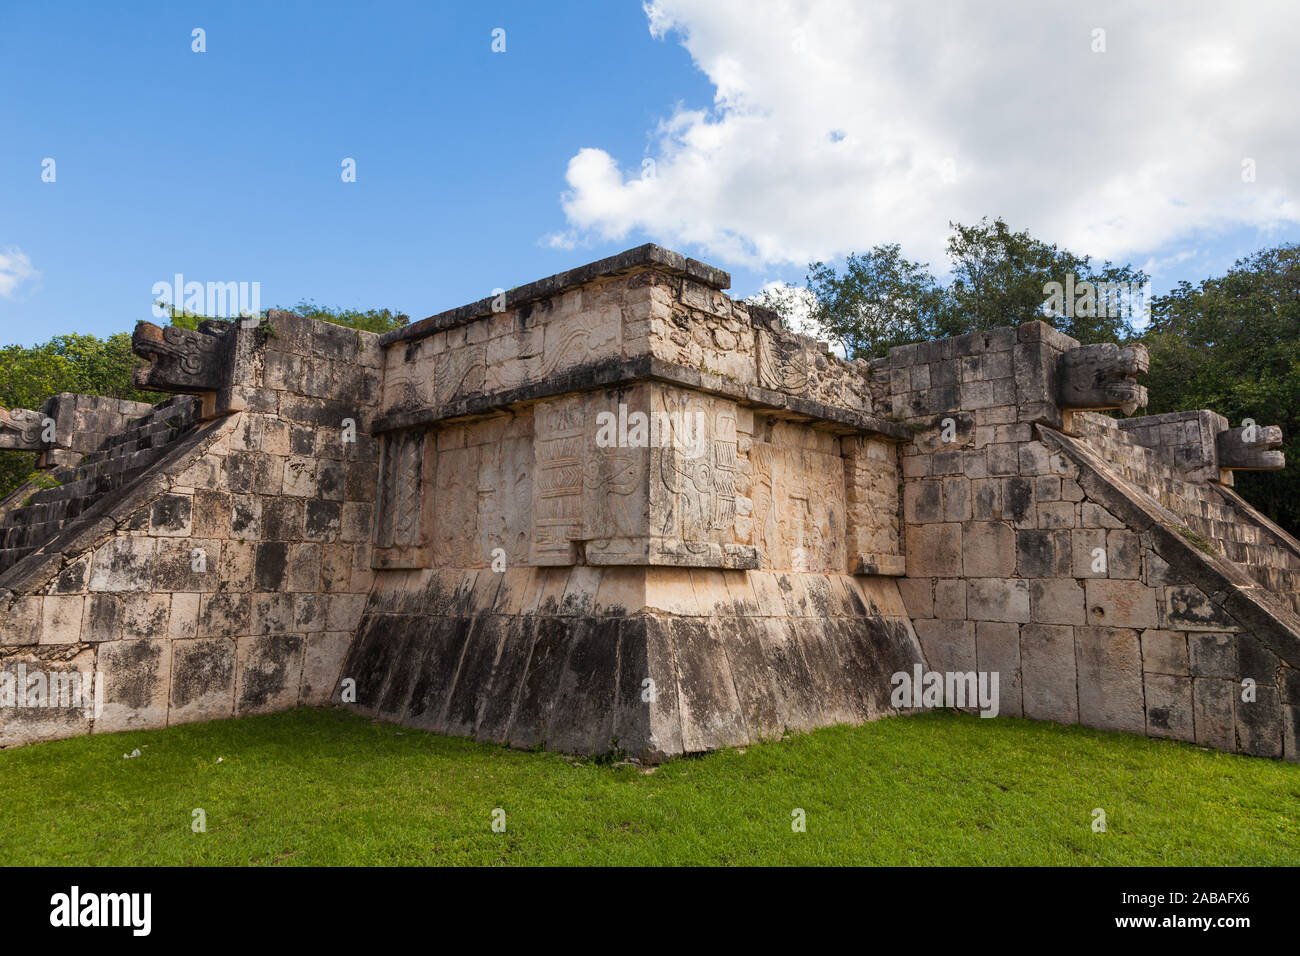 Partial view of the Temple of the Jaguar at the Mayan Chichen Itza site on the Yucatan peninsula of Mexico Stock Photo